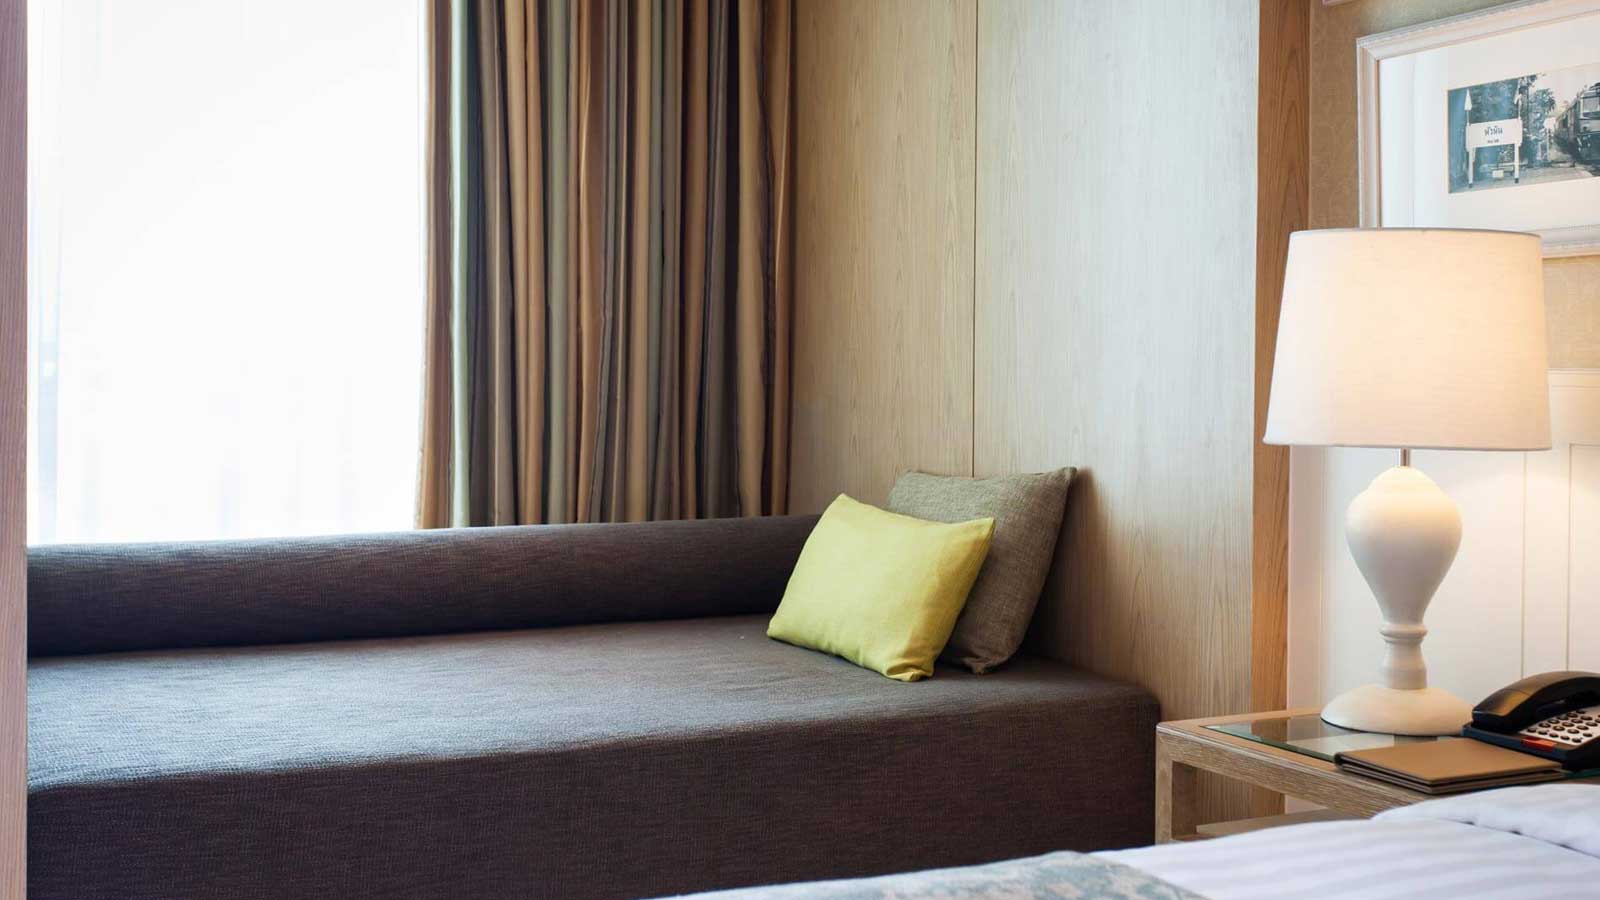 Deluxe Hill View - Daybed - อมารี หัวหิน